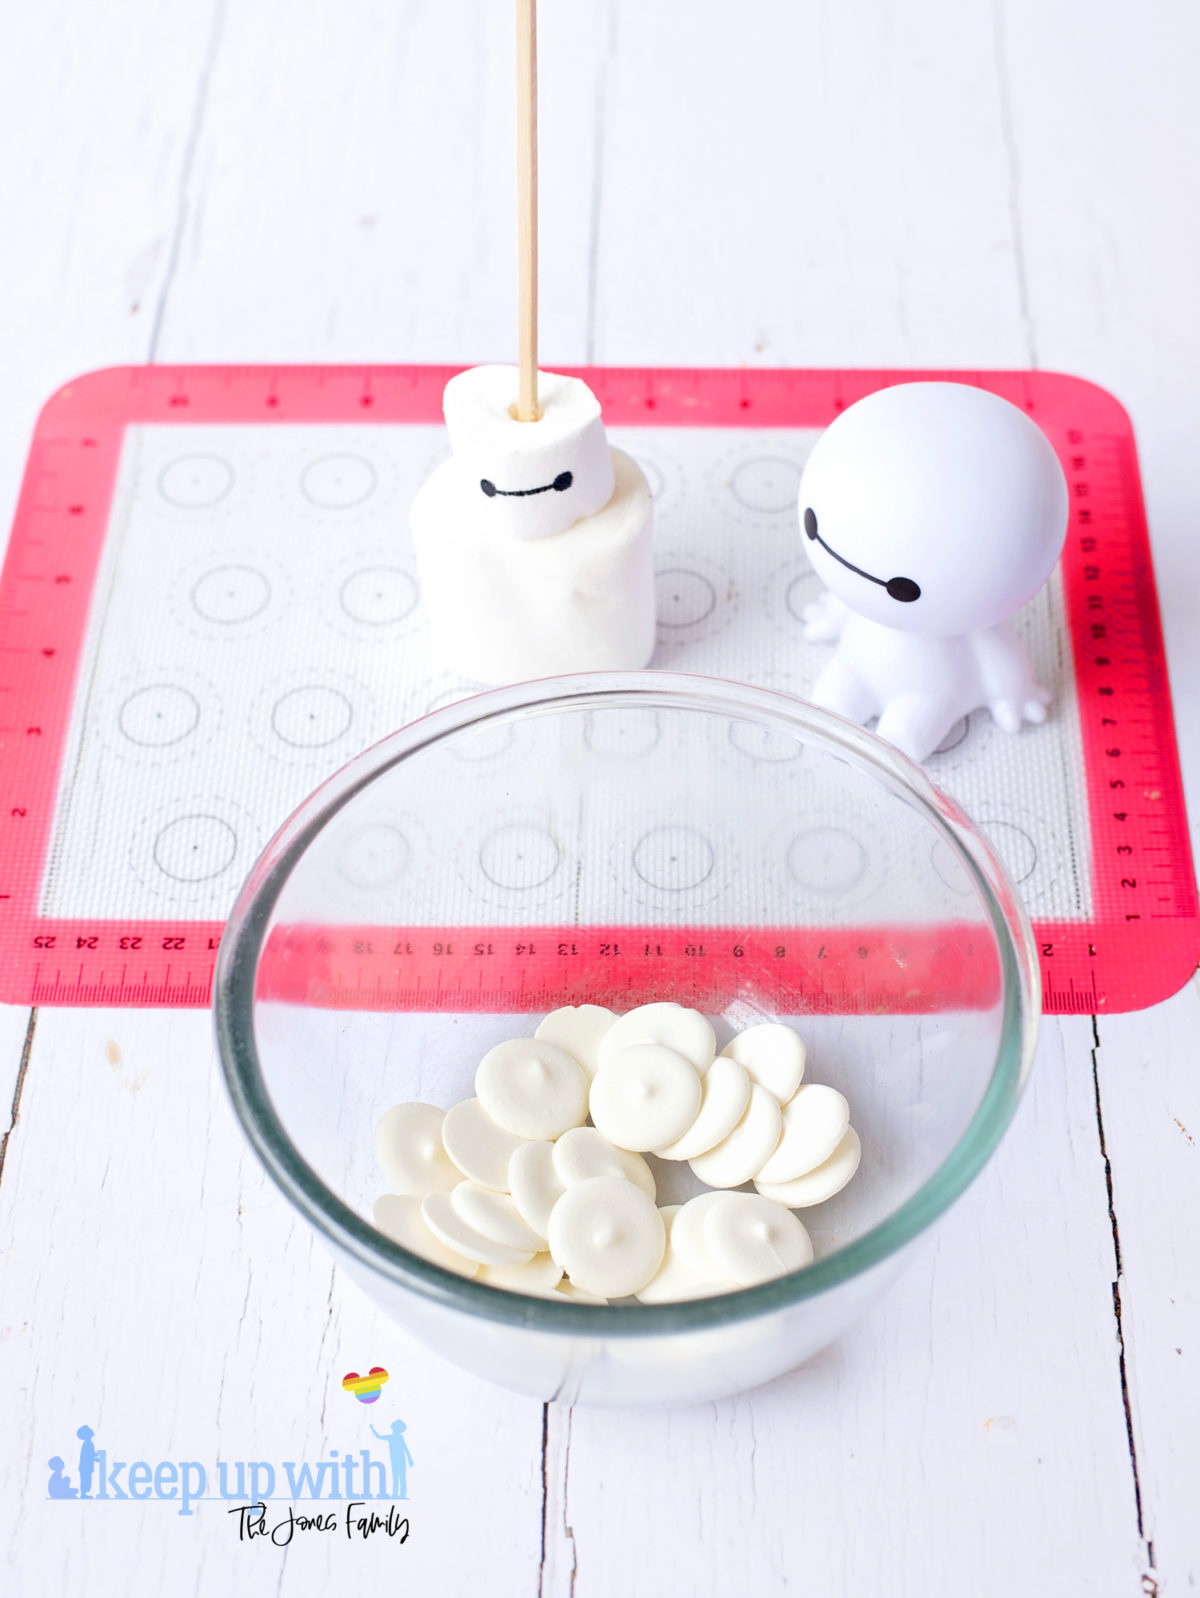 Image shows a plastic Baymax figure from Disney Pixar's Big Hero 6, and a Marshmallow Bayman Pop sat next to it on a red and white silicone baking mat. In front of them is a bowl full of white candy melts in a glass microwaveable bowl. Image by Keep Up With The Jones Family.